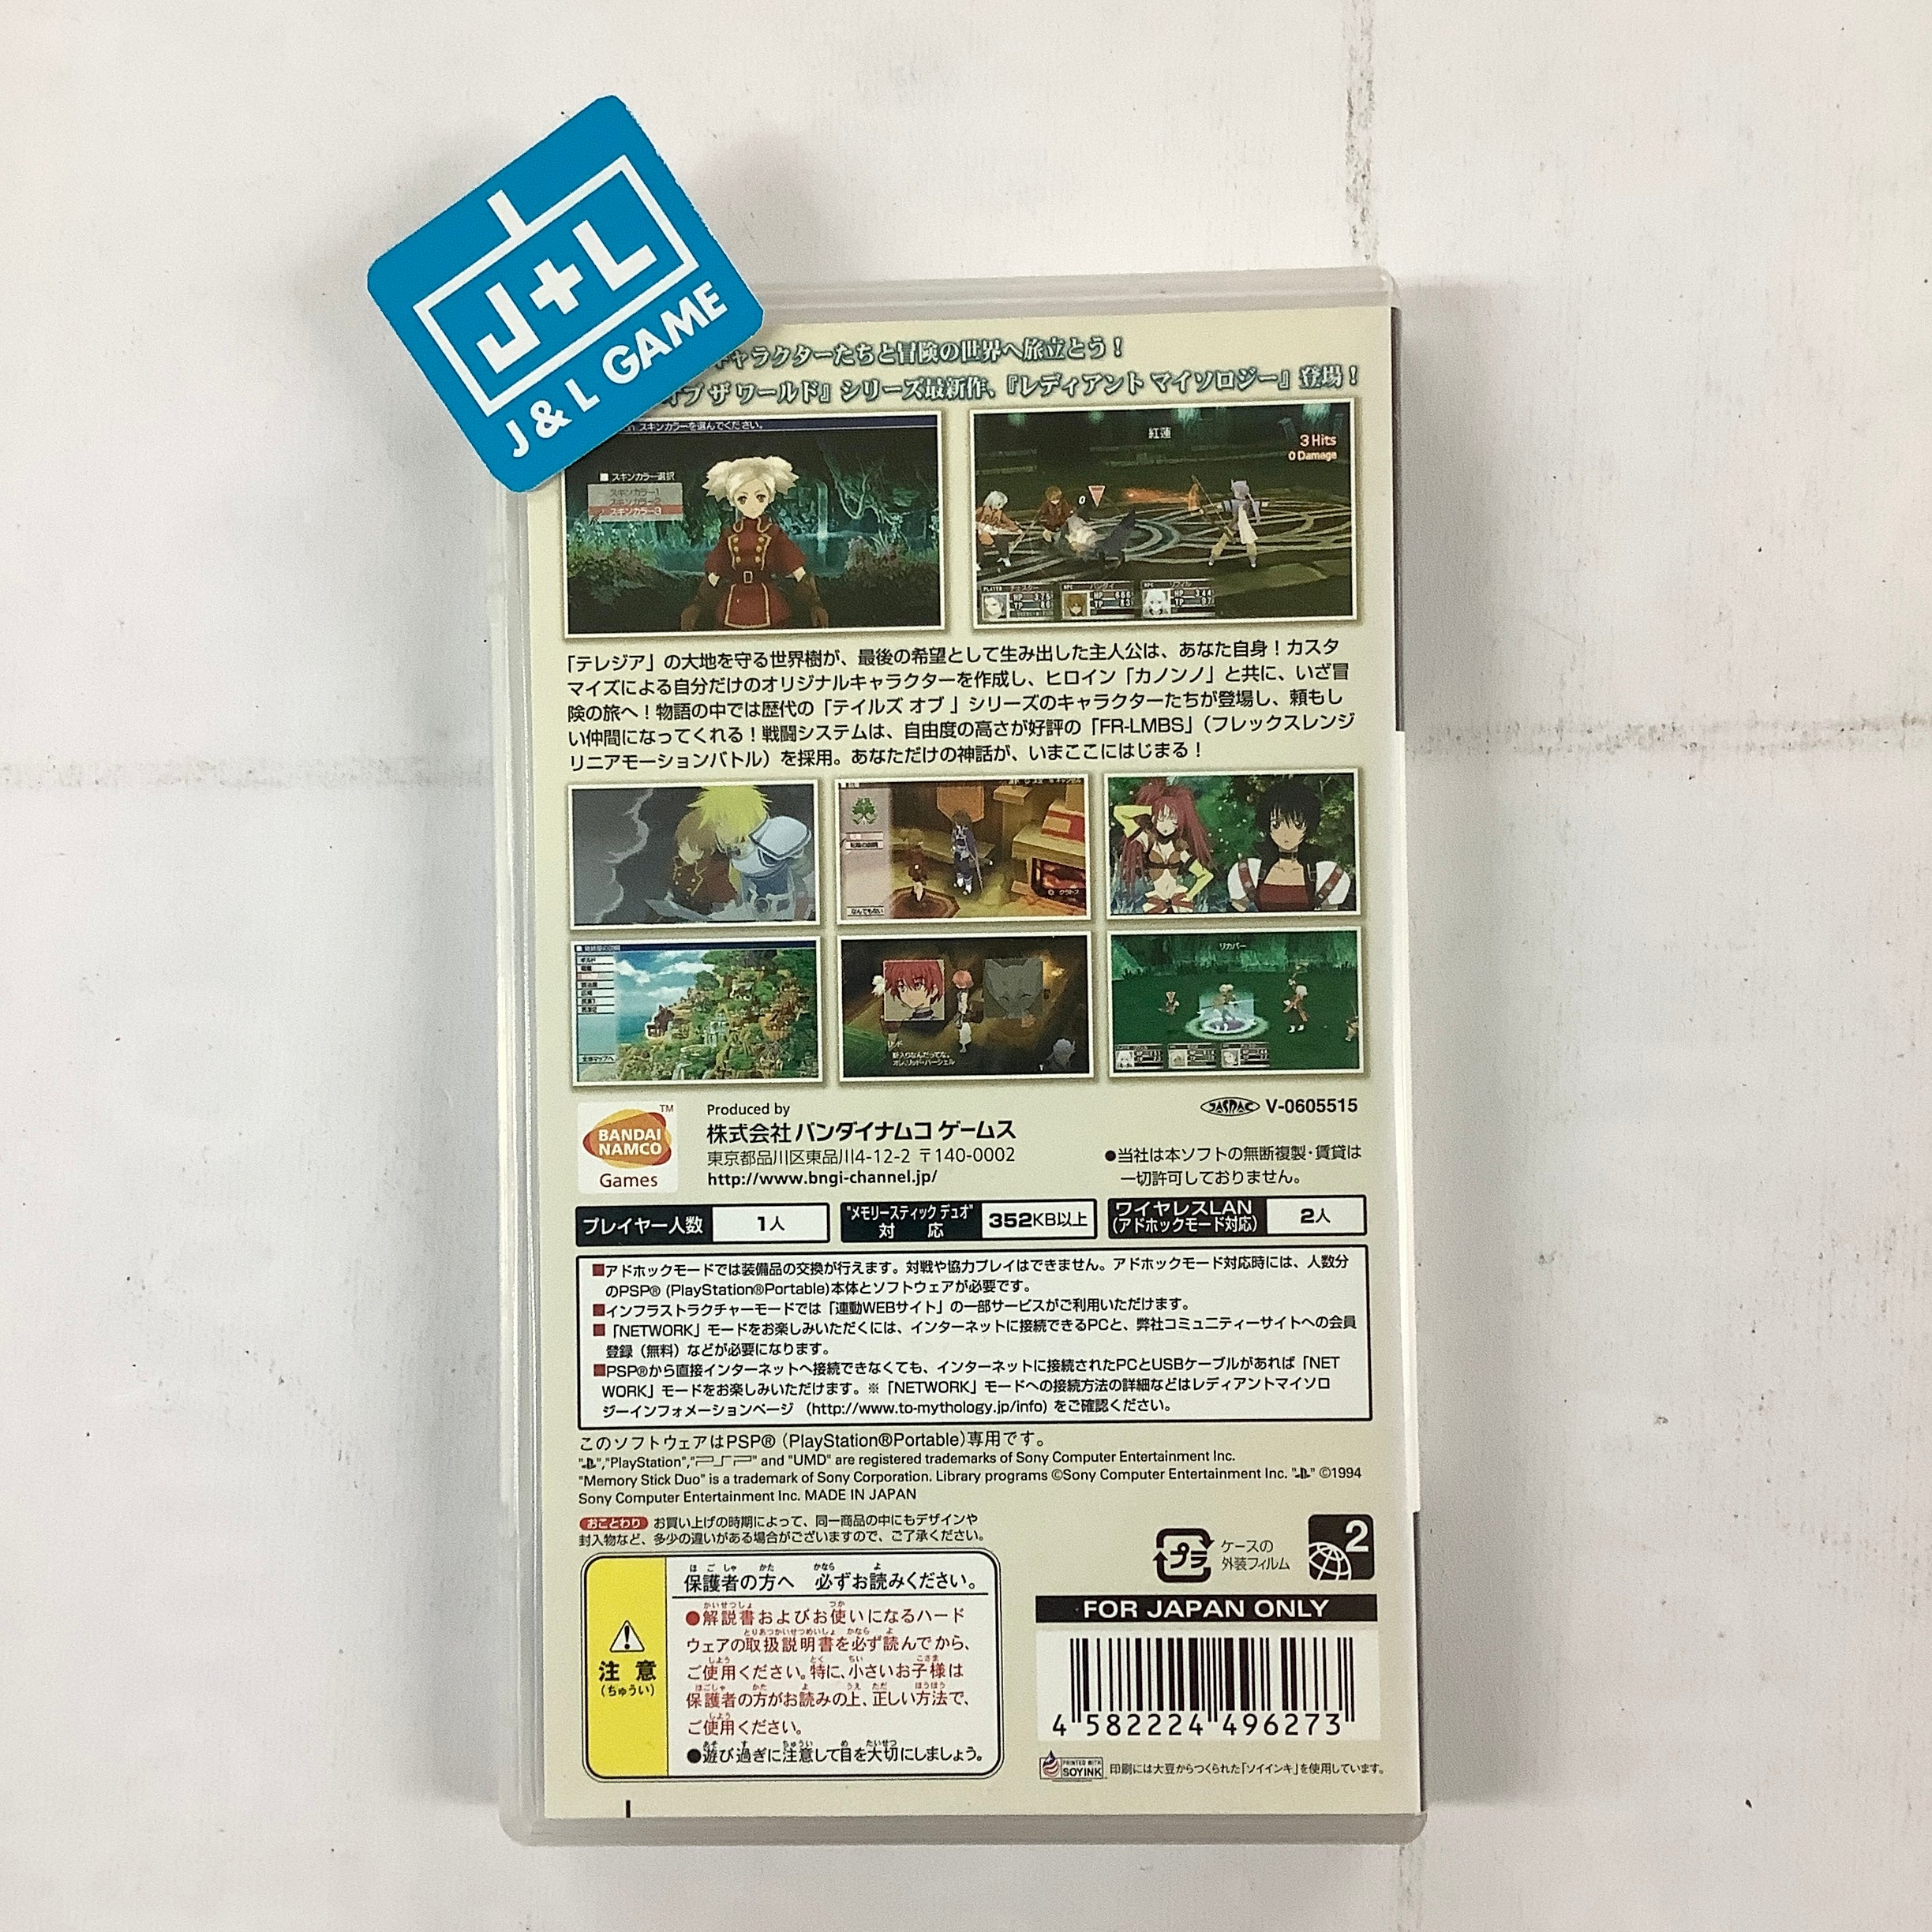 Tales of the World: Radiant Mythology - Sony PSP [Pre-Owned] (Japanese Import) Video Games Bandai Namco Games   